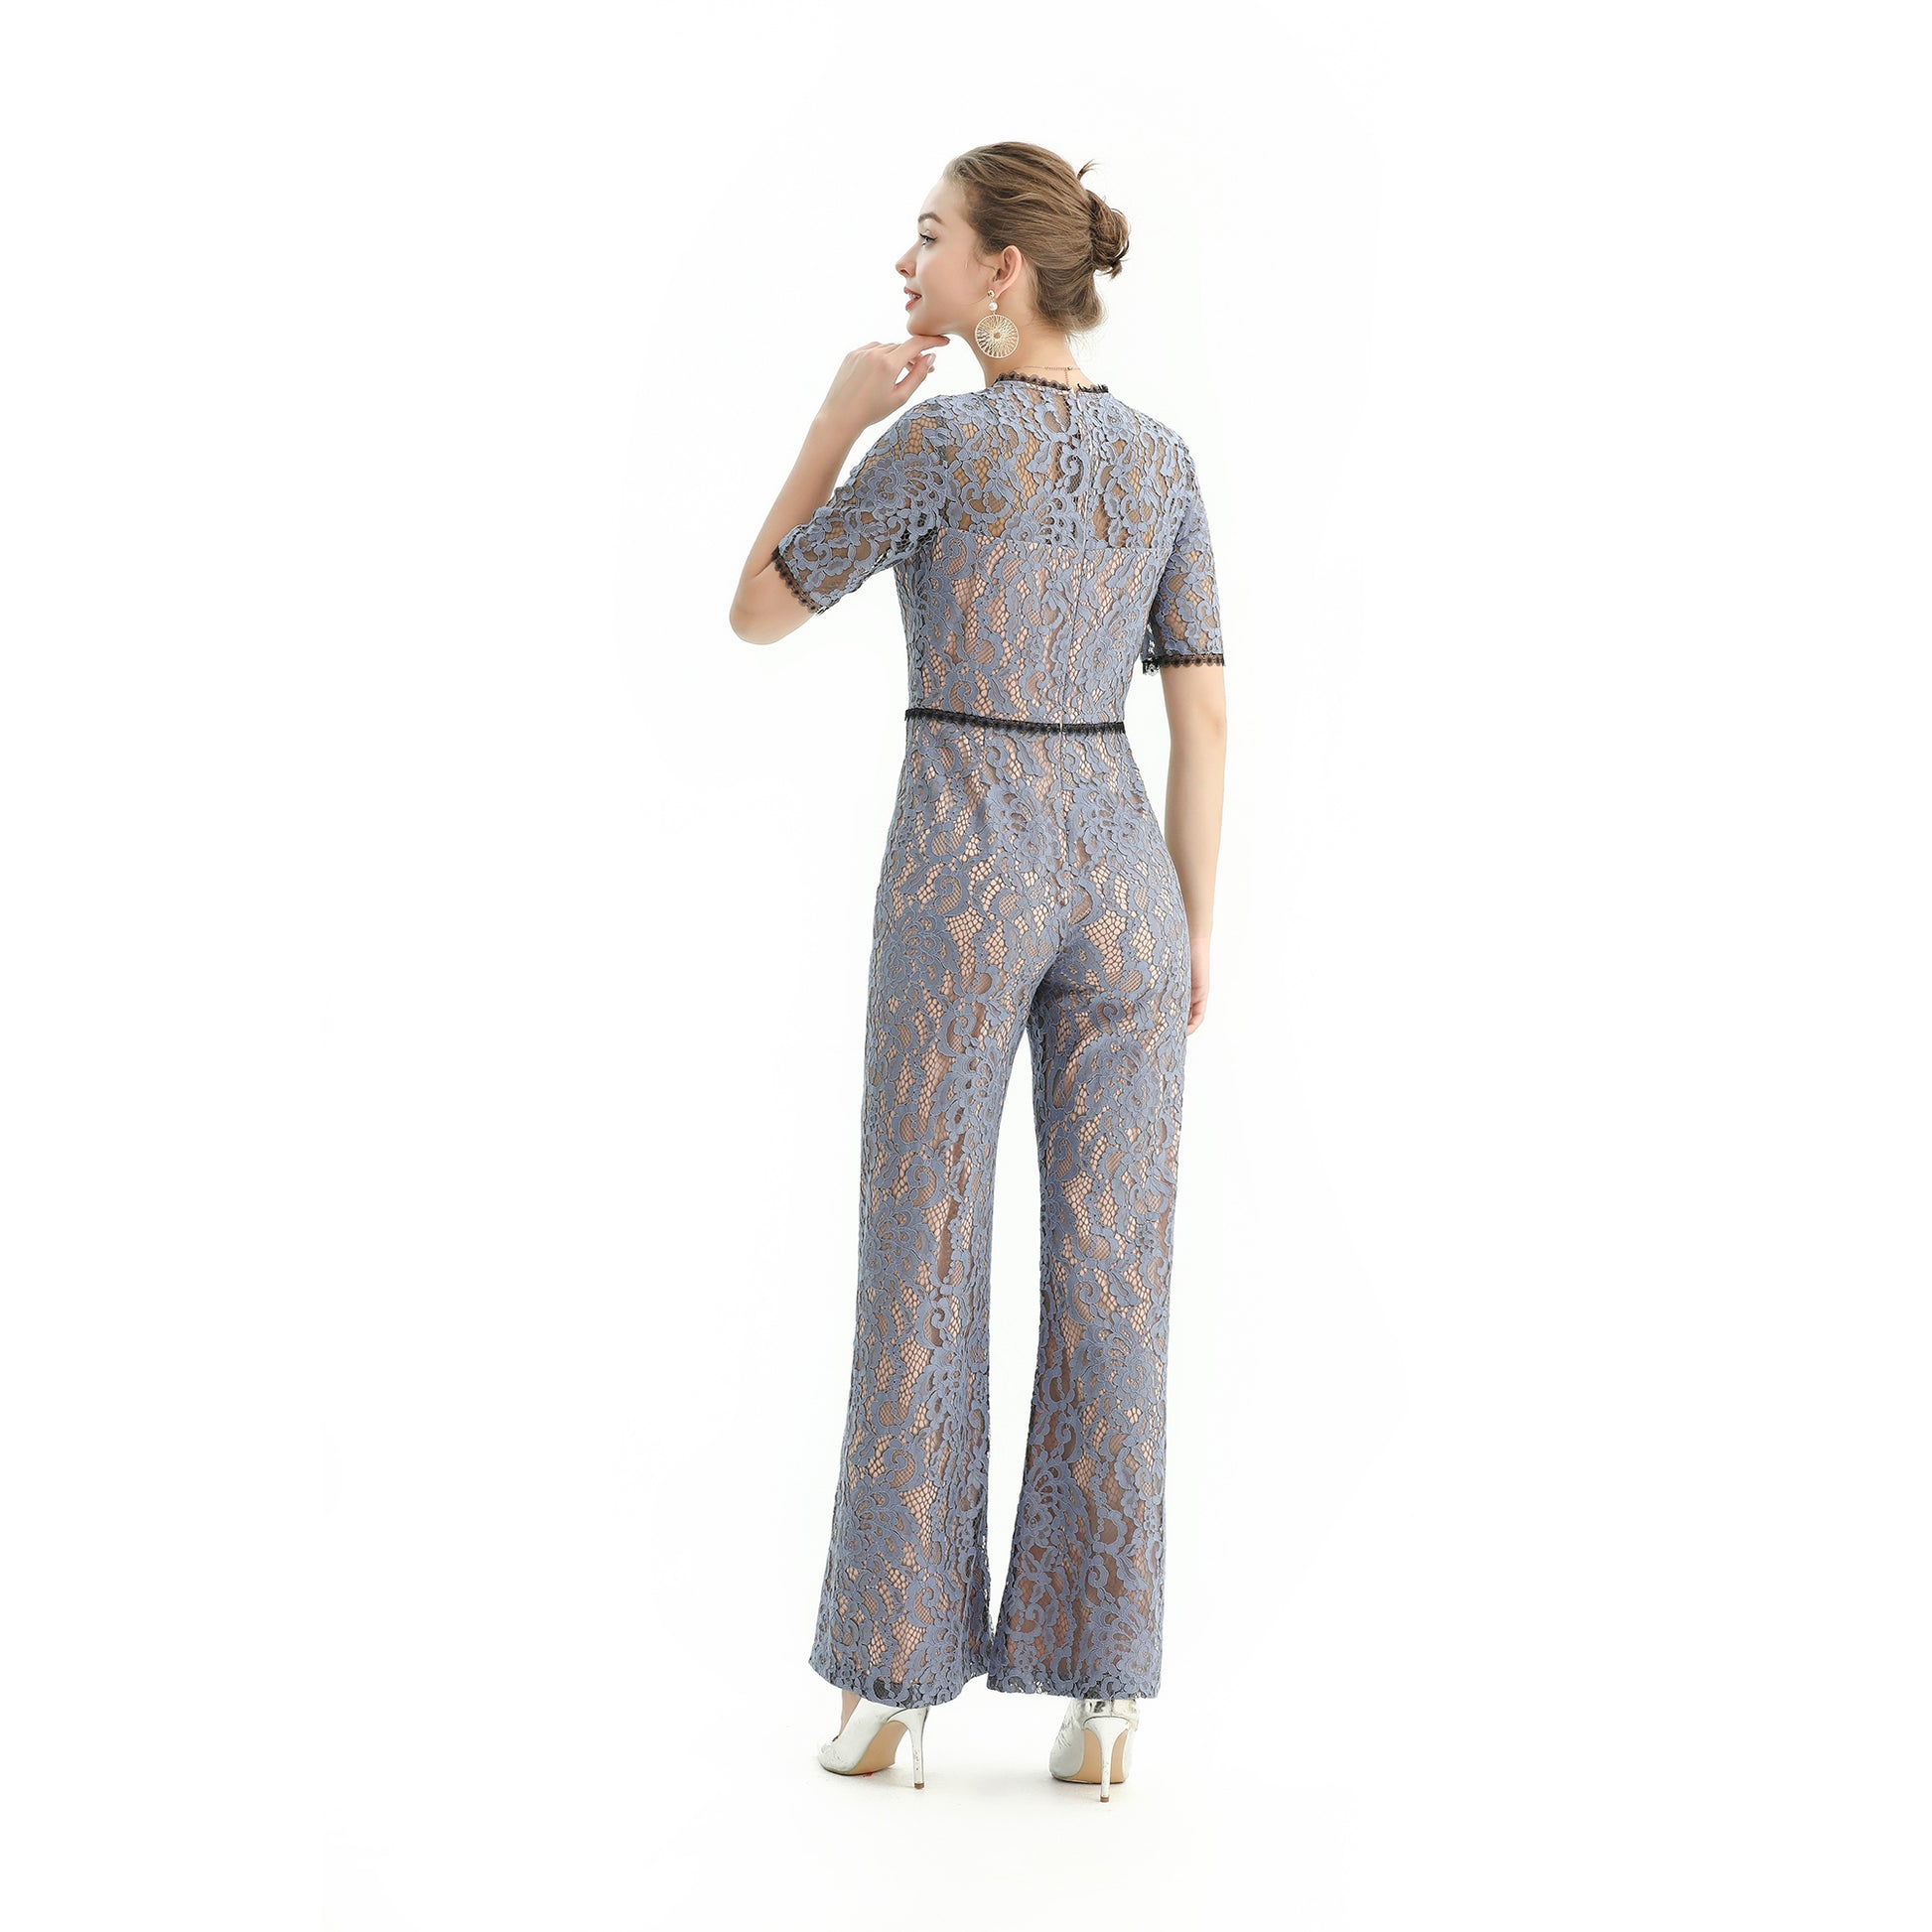 JJparty-R163 Women all-over lace short sleeves party jumpsuit